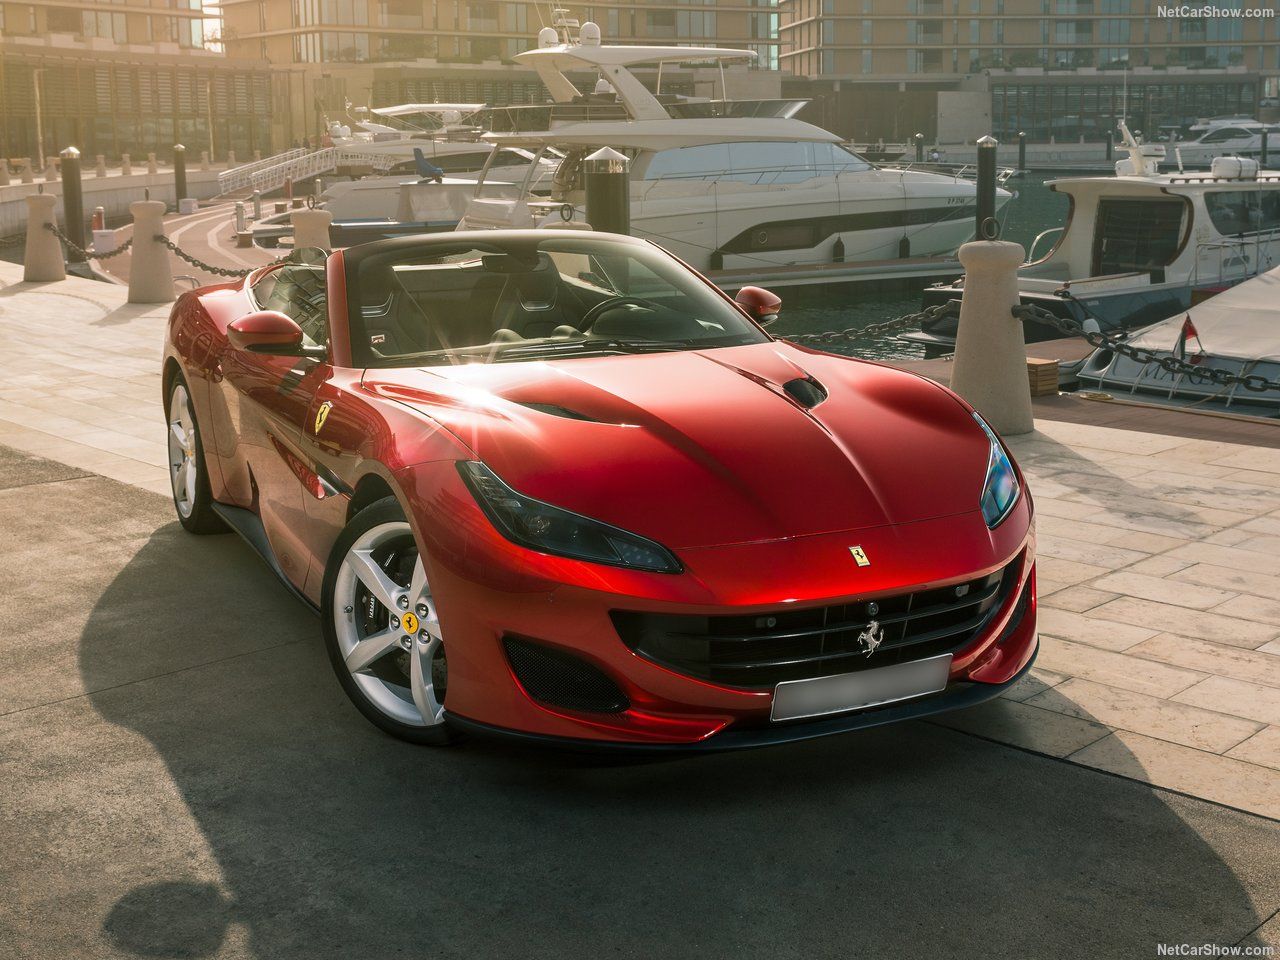 Red Ferrari Portofino parked in front of yachts